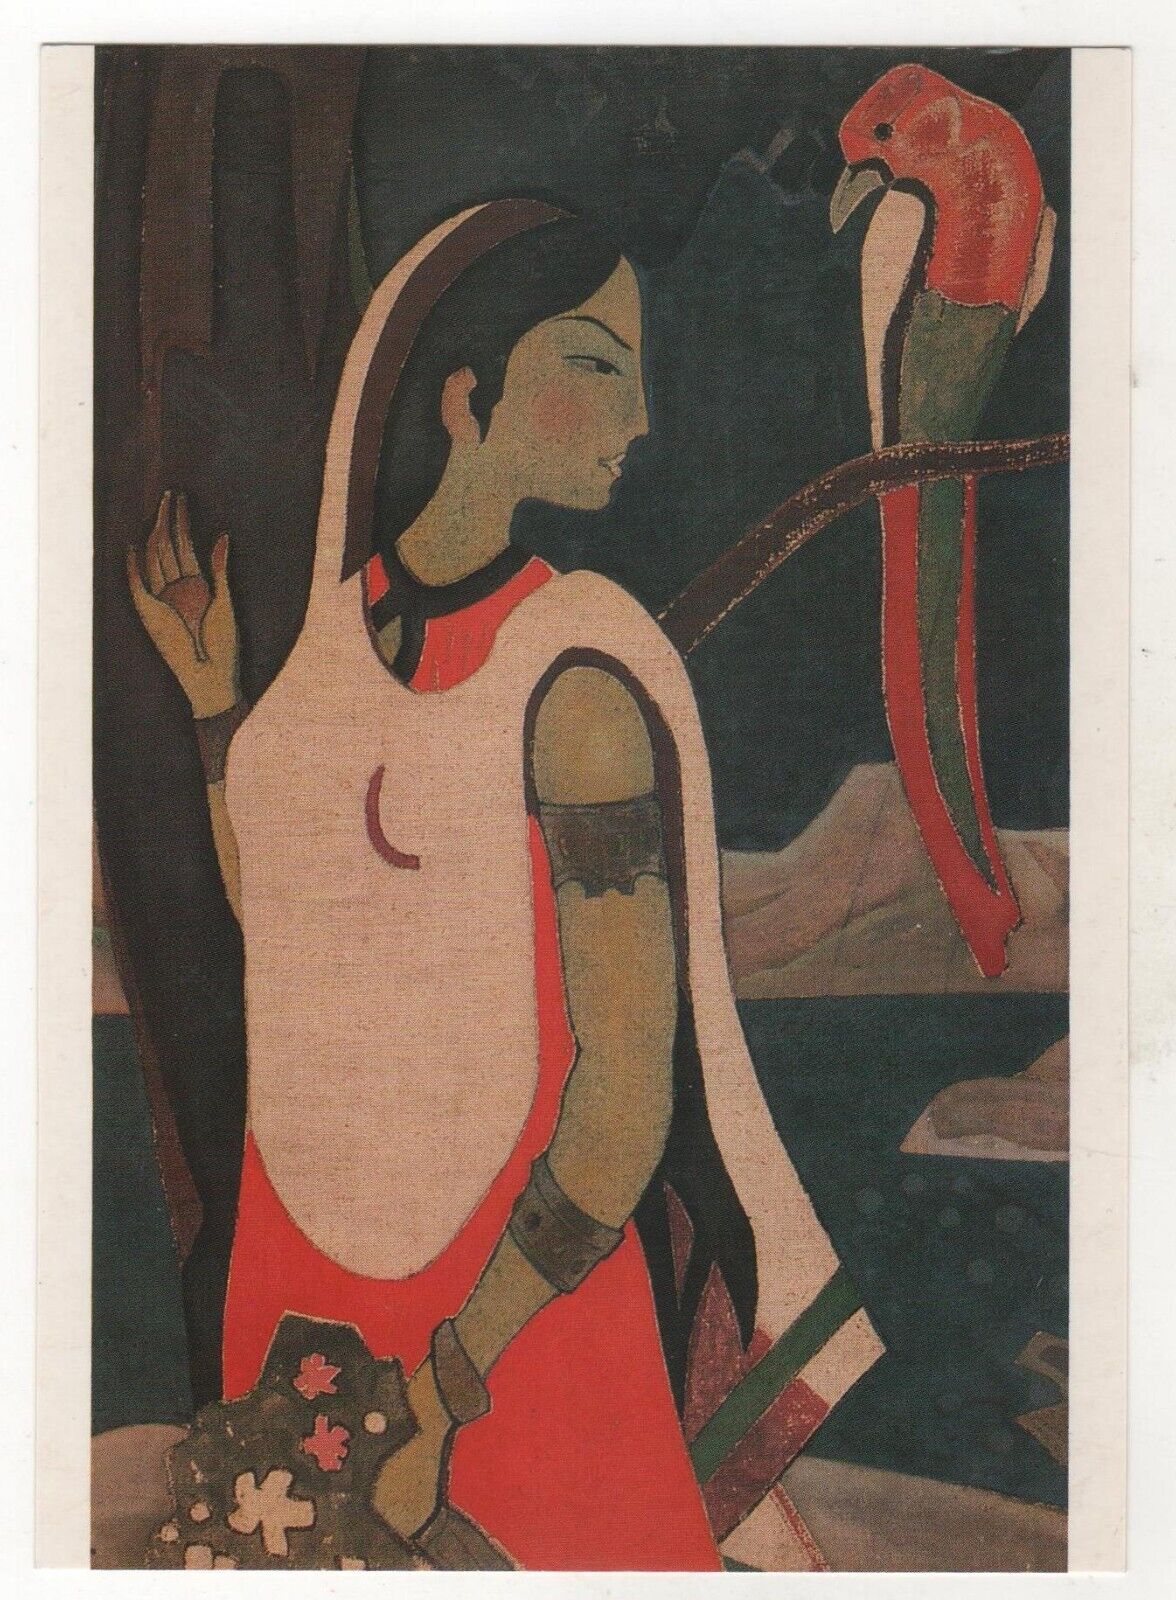 1954 “The Language of Birds” Girl & Parrot ART N. Roerich Russian old Postcard